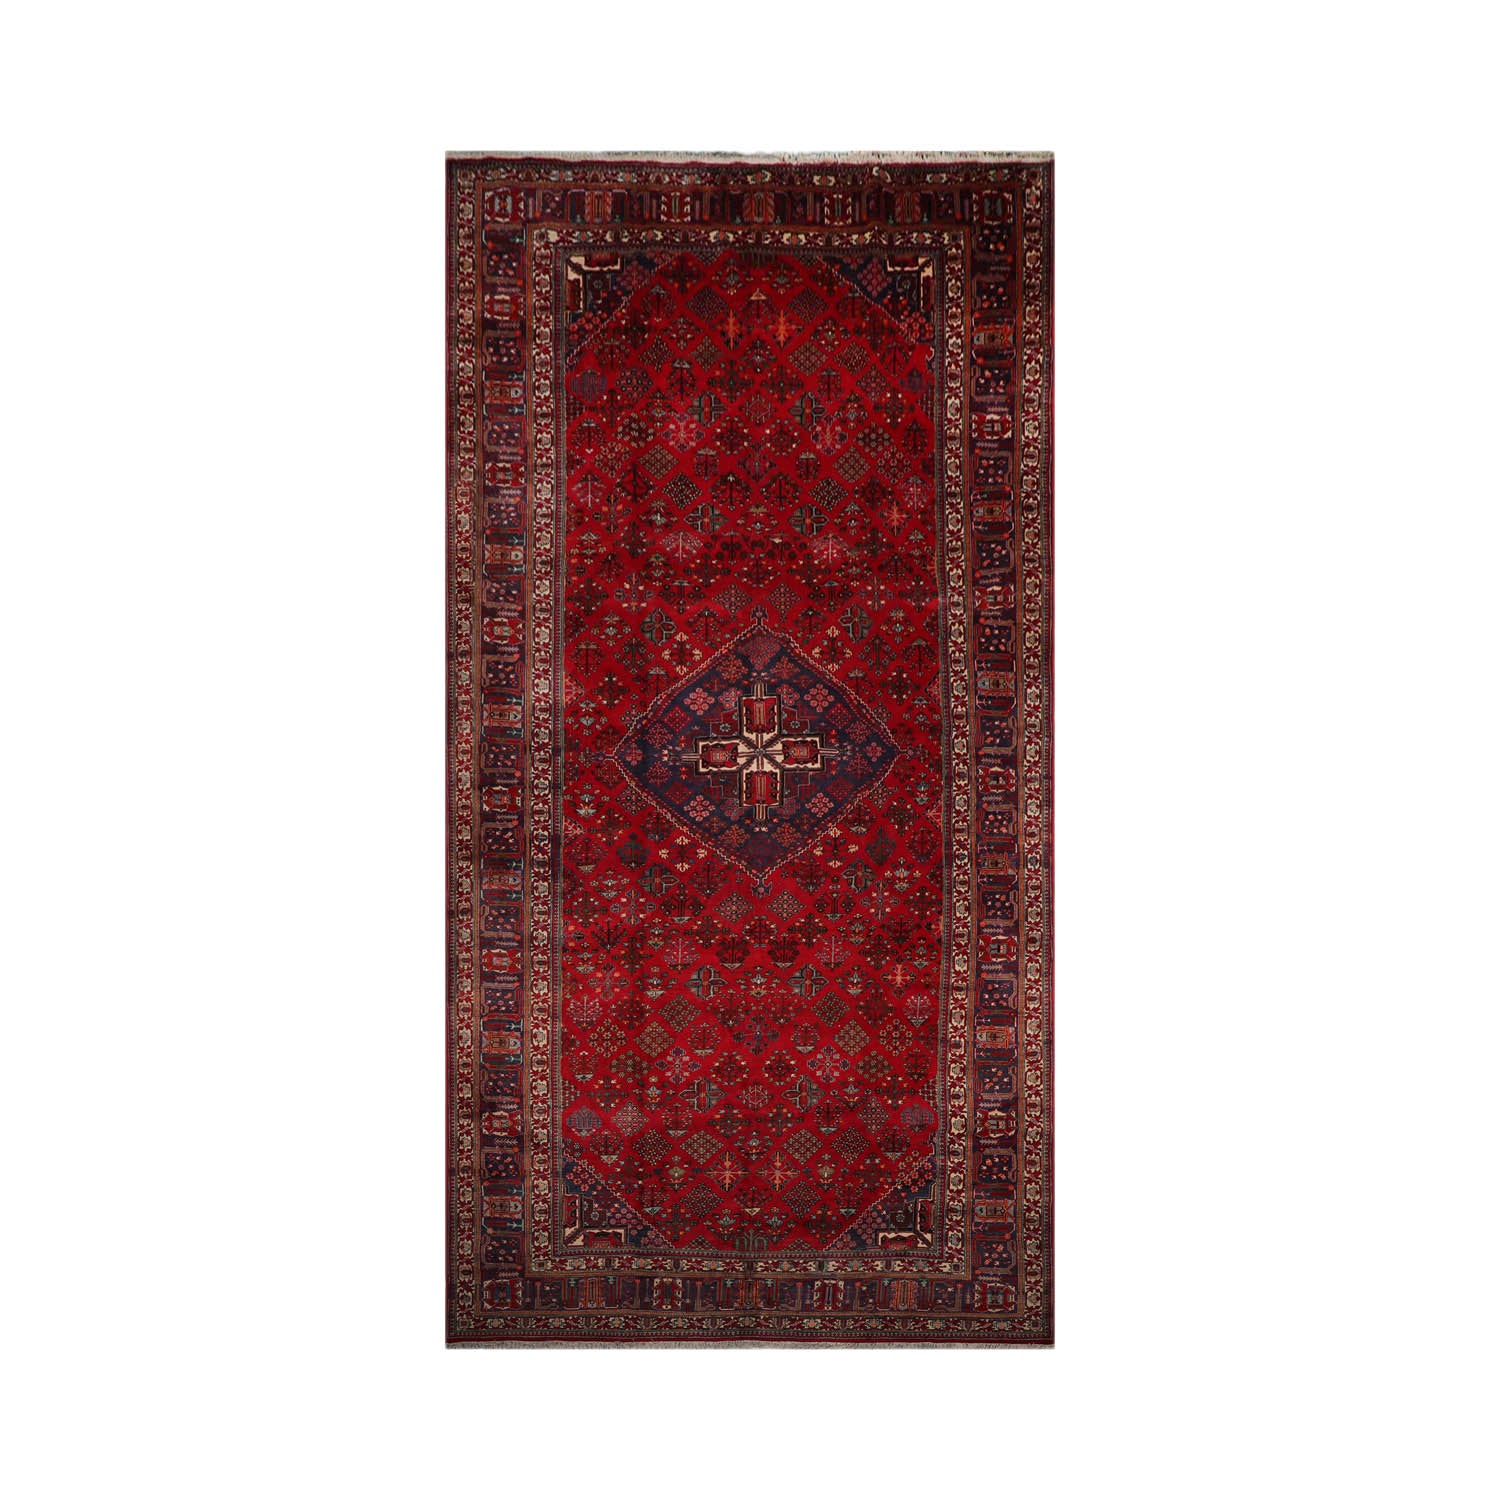 Jakima Palace Hand Knotted 100% Wool Traditional Oriental Area Rug Red, Indigo Color